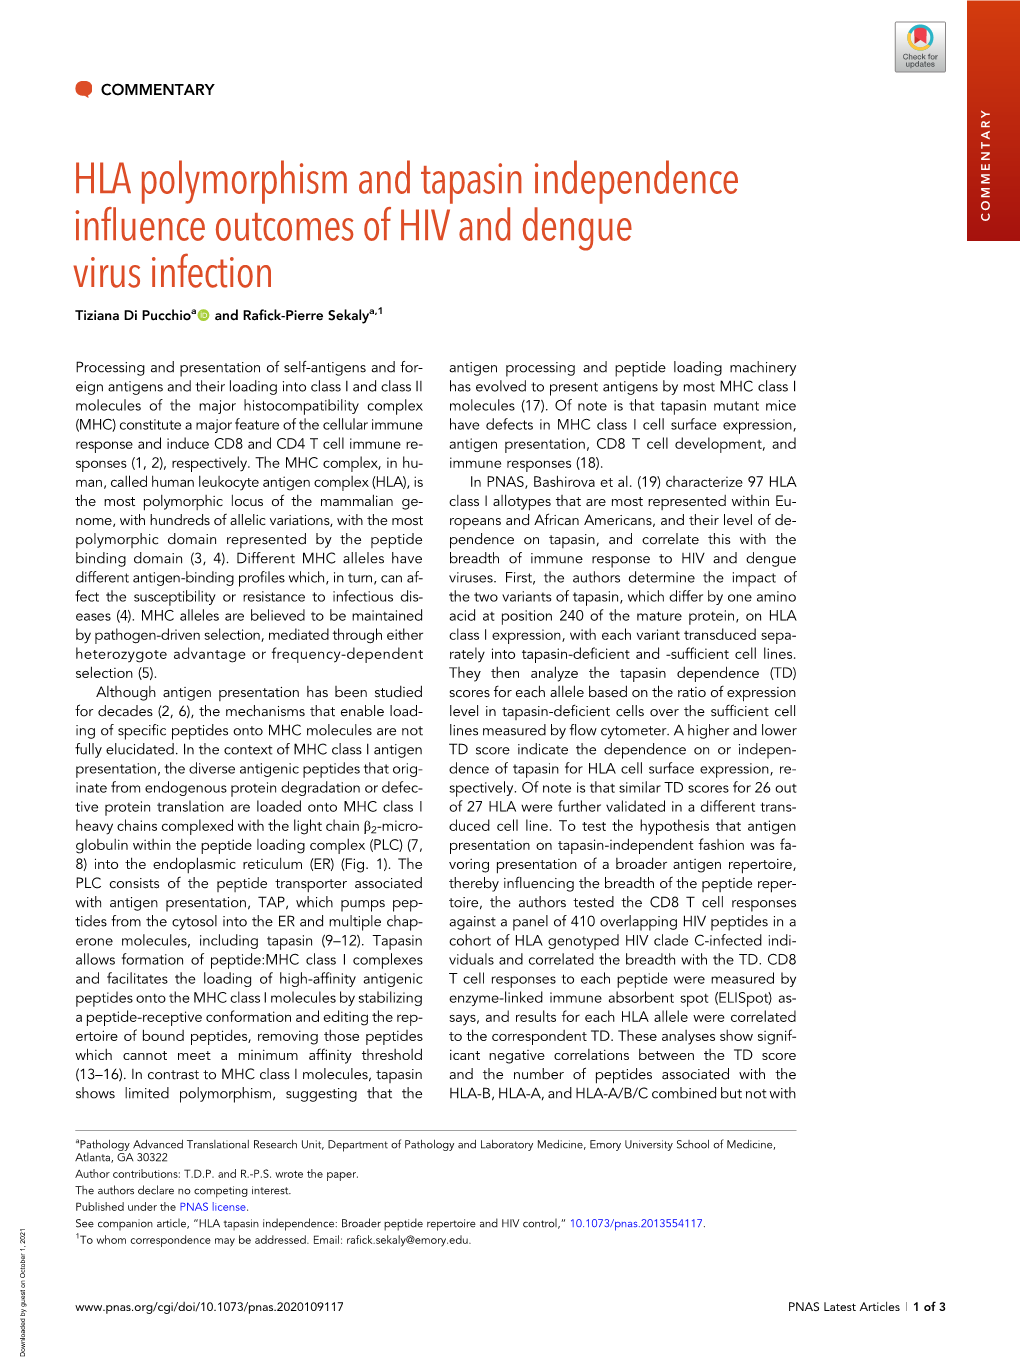 HLA Polymorphism and Tapasin Independence Influence Outcomes of HIV and Dengue COMMENTARY Virus Infection Tiziana Di Pucchioa and Rafick-Pierre Sekalya,1